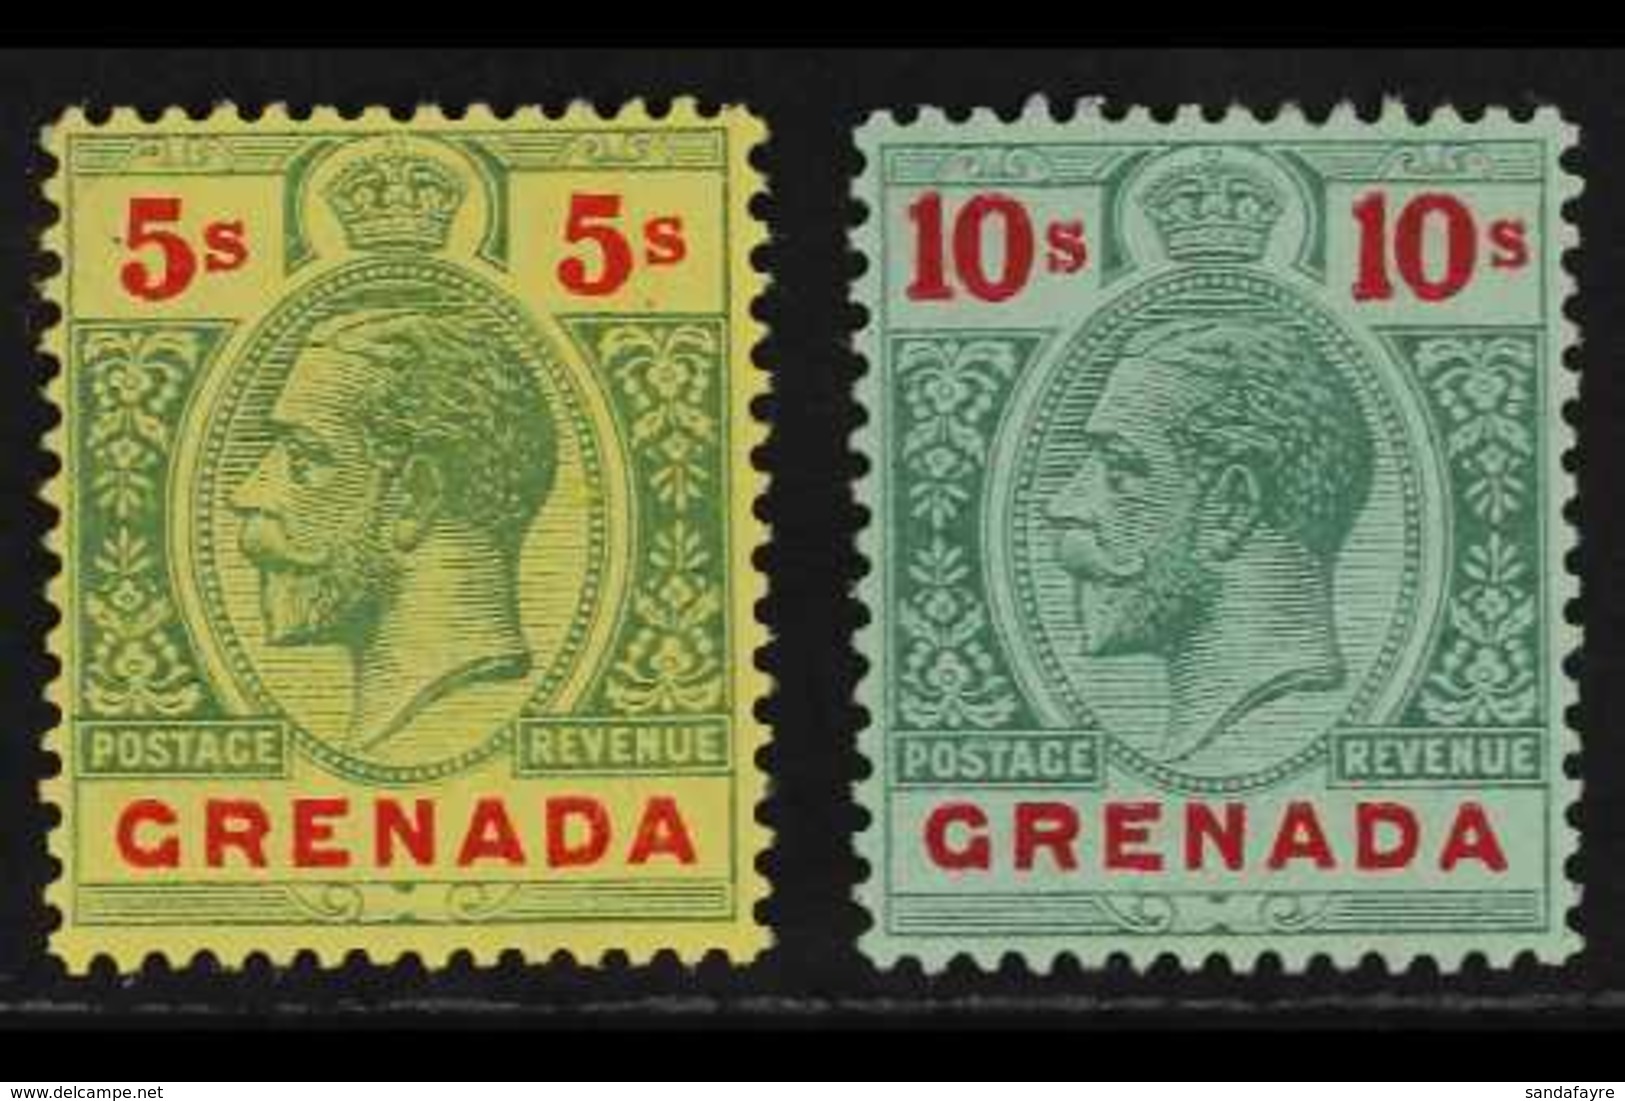 1913-22 5s Green & Red On Yellow And 10s Green & Red On Green Top Values, SG 100/01, Superb Mint, Very Fresh. (2 Stamps) - Grenade (...-1974)